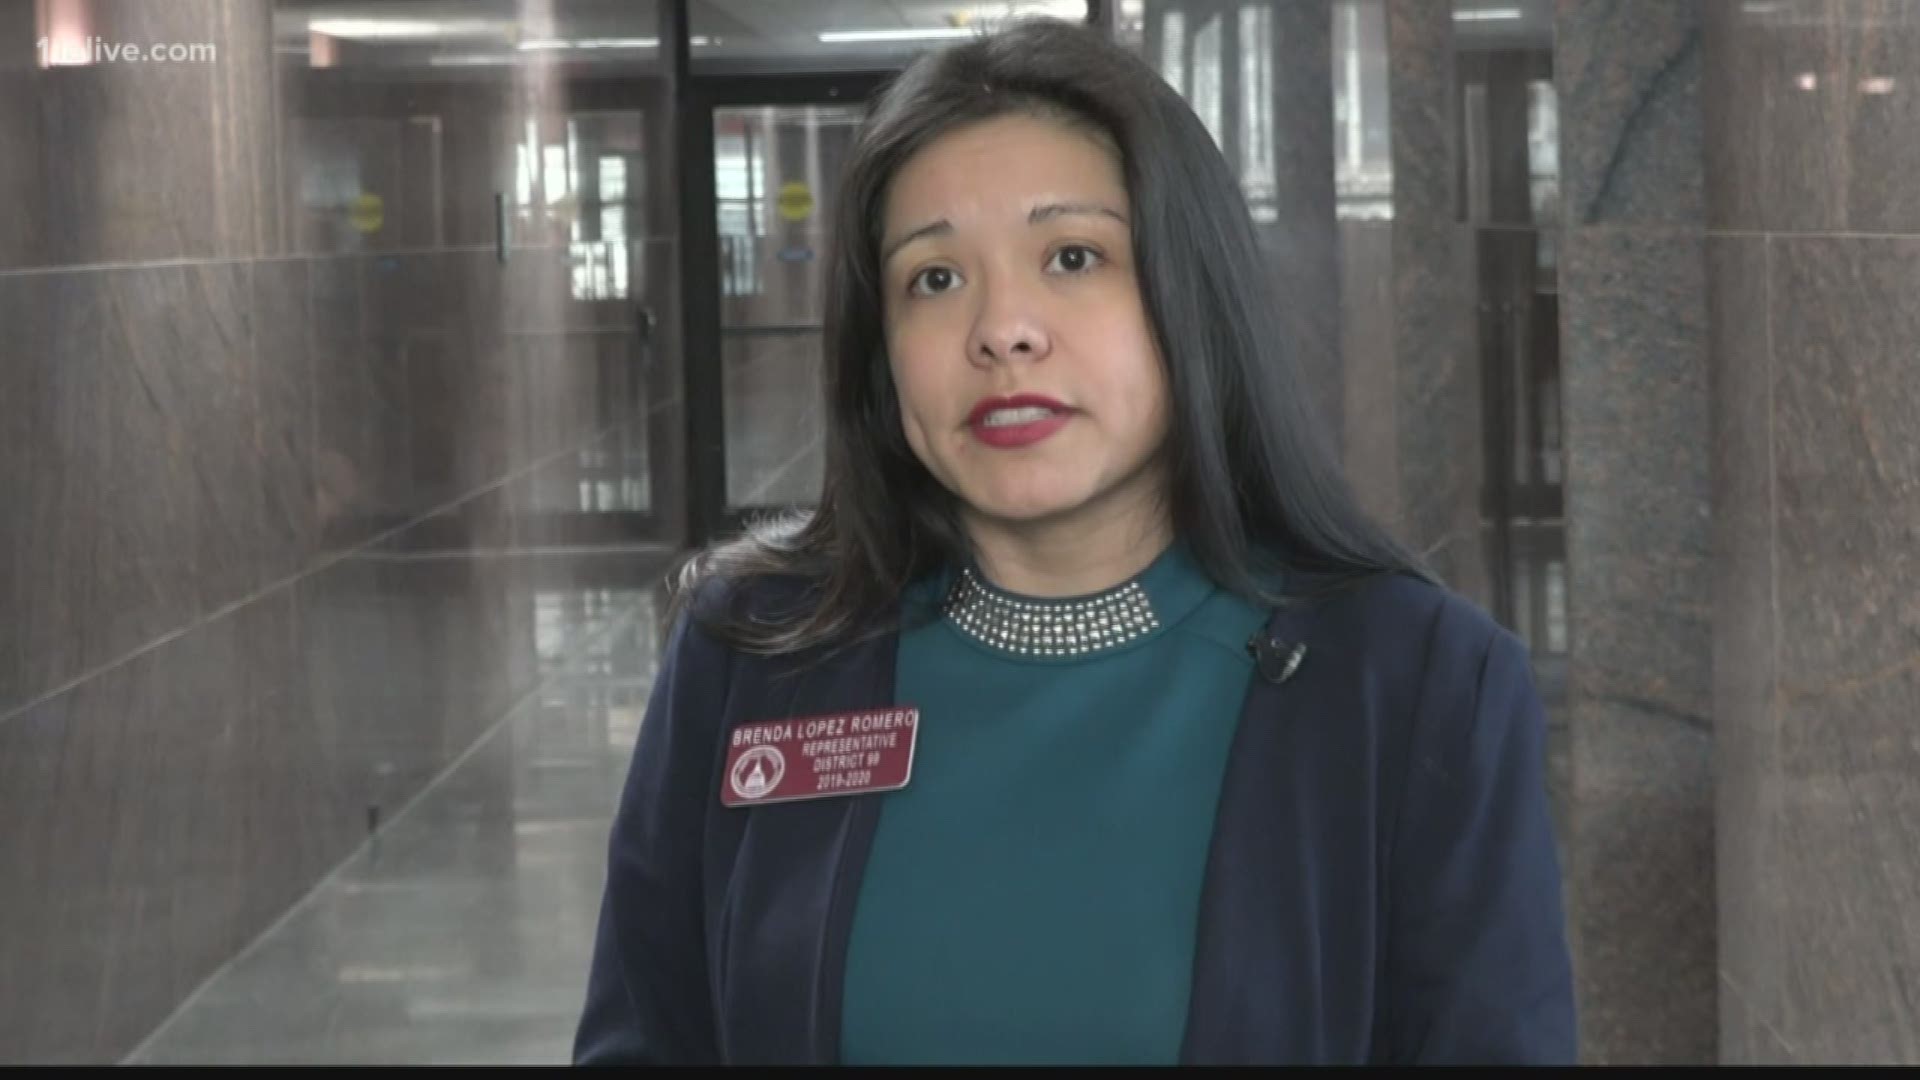 Brenda Lopez Romero is one of the state representatives to introduce House Bill 896